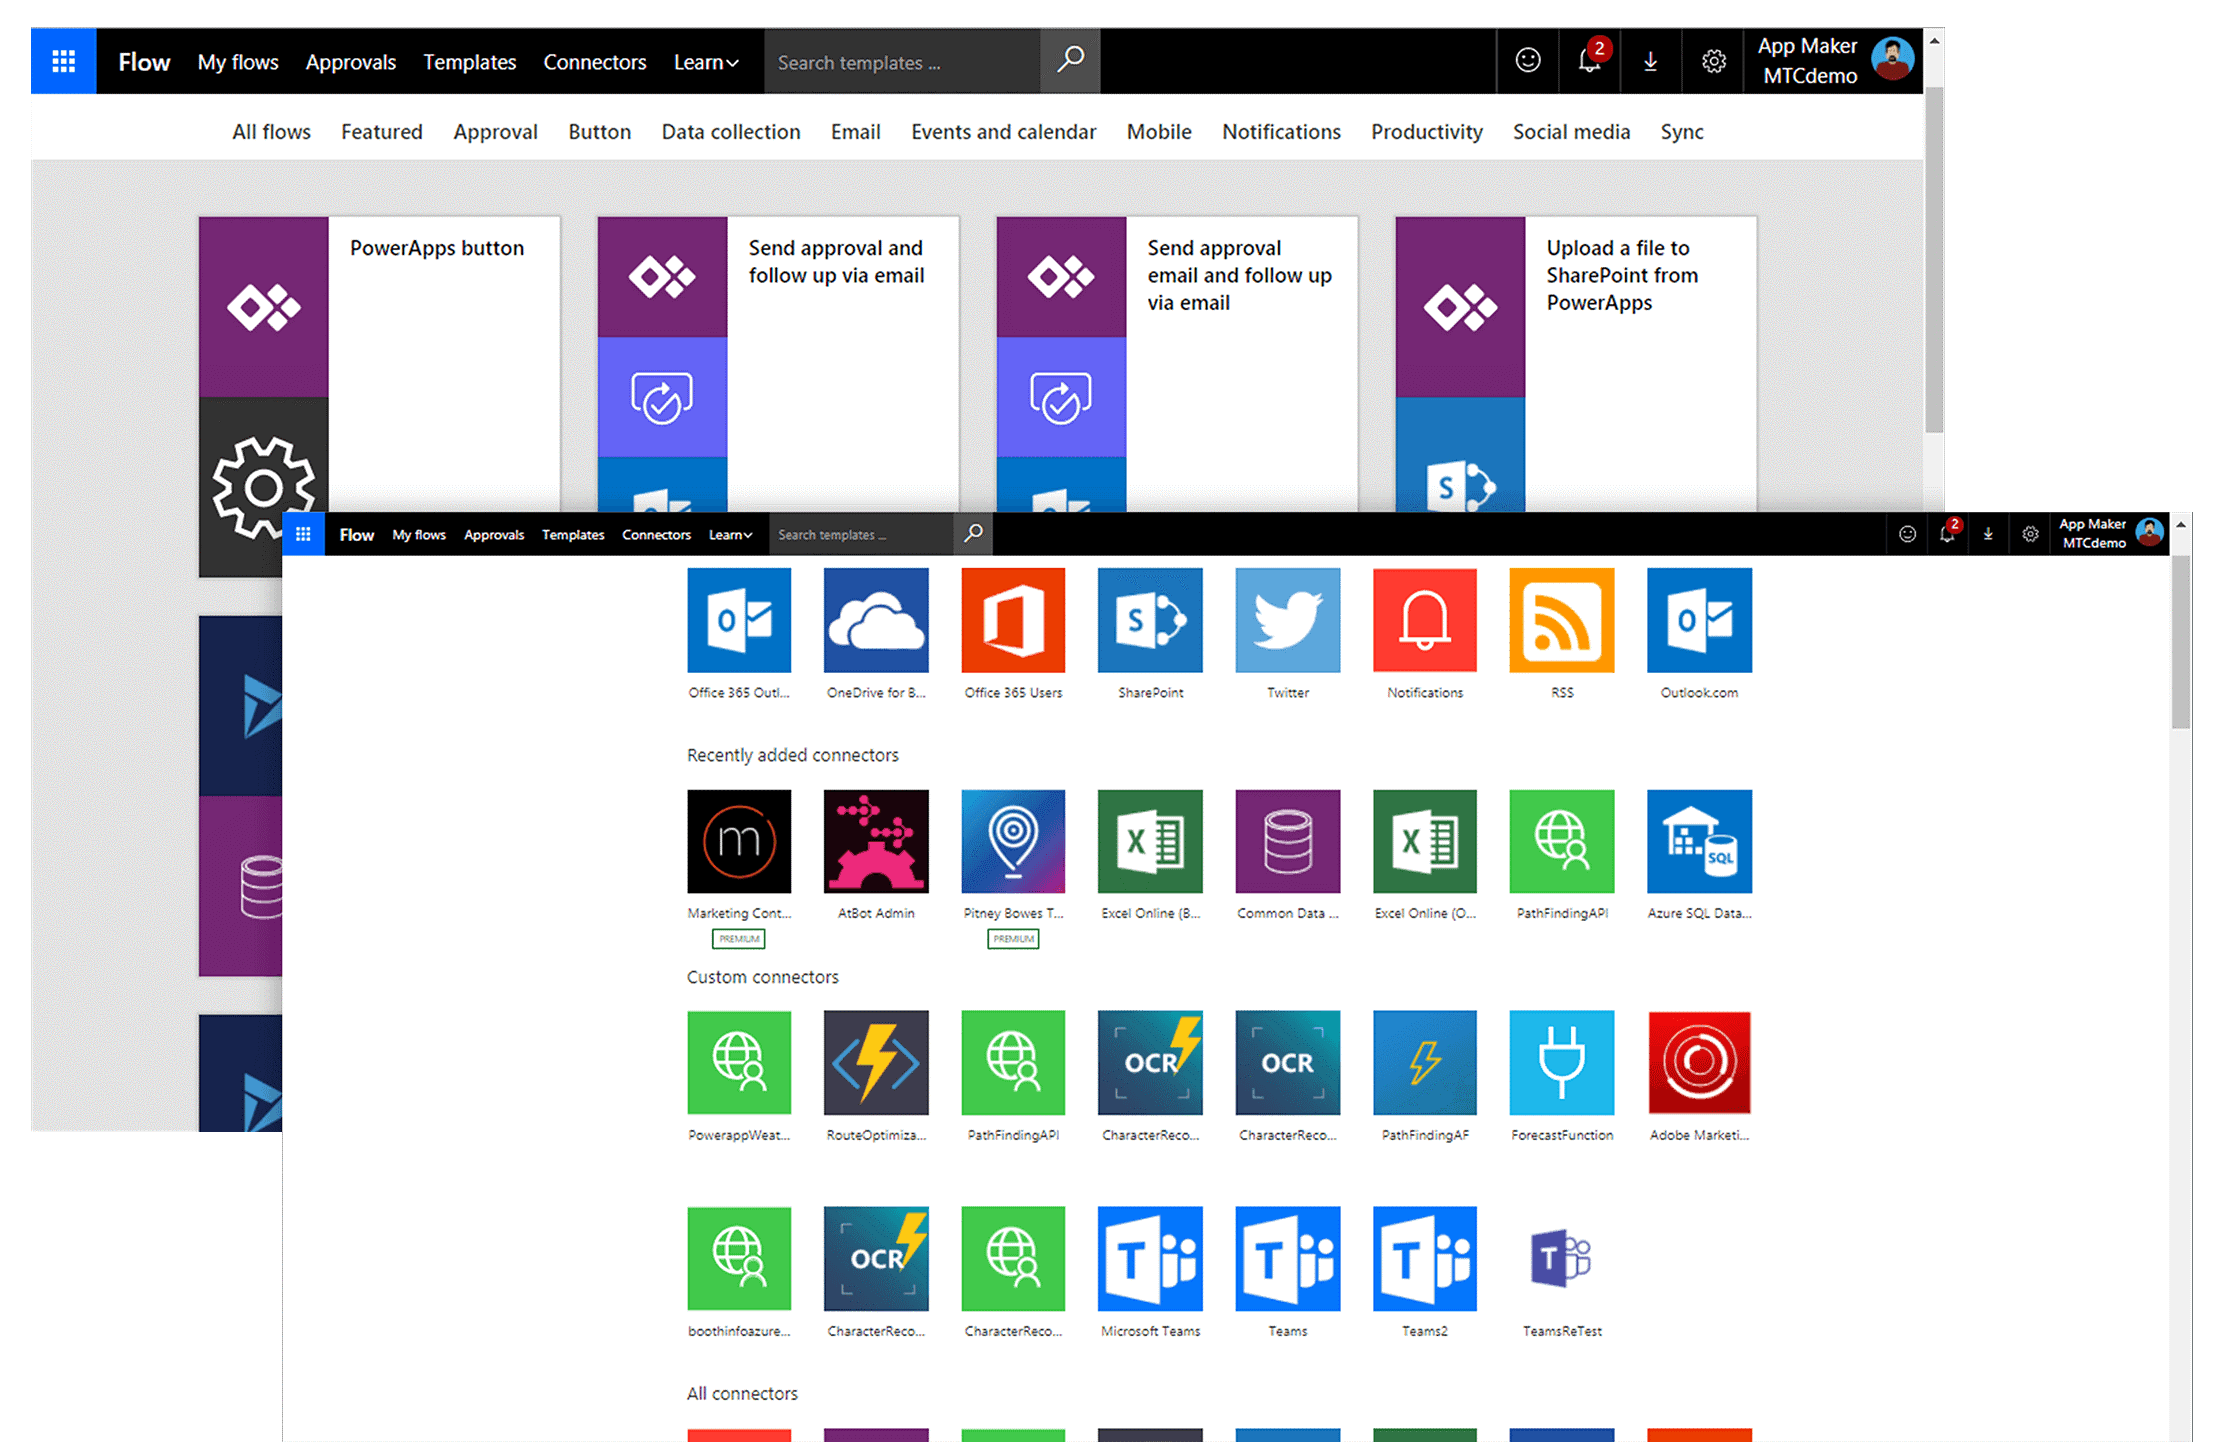 Screenshot of Microsoft Power Automate Connector Library